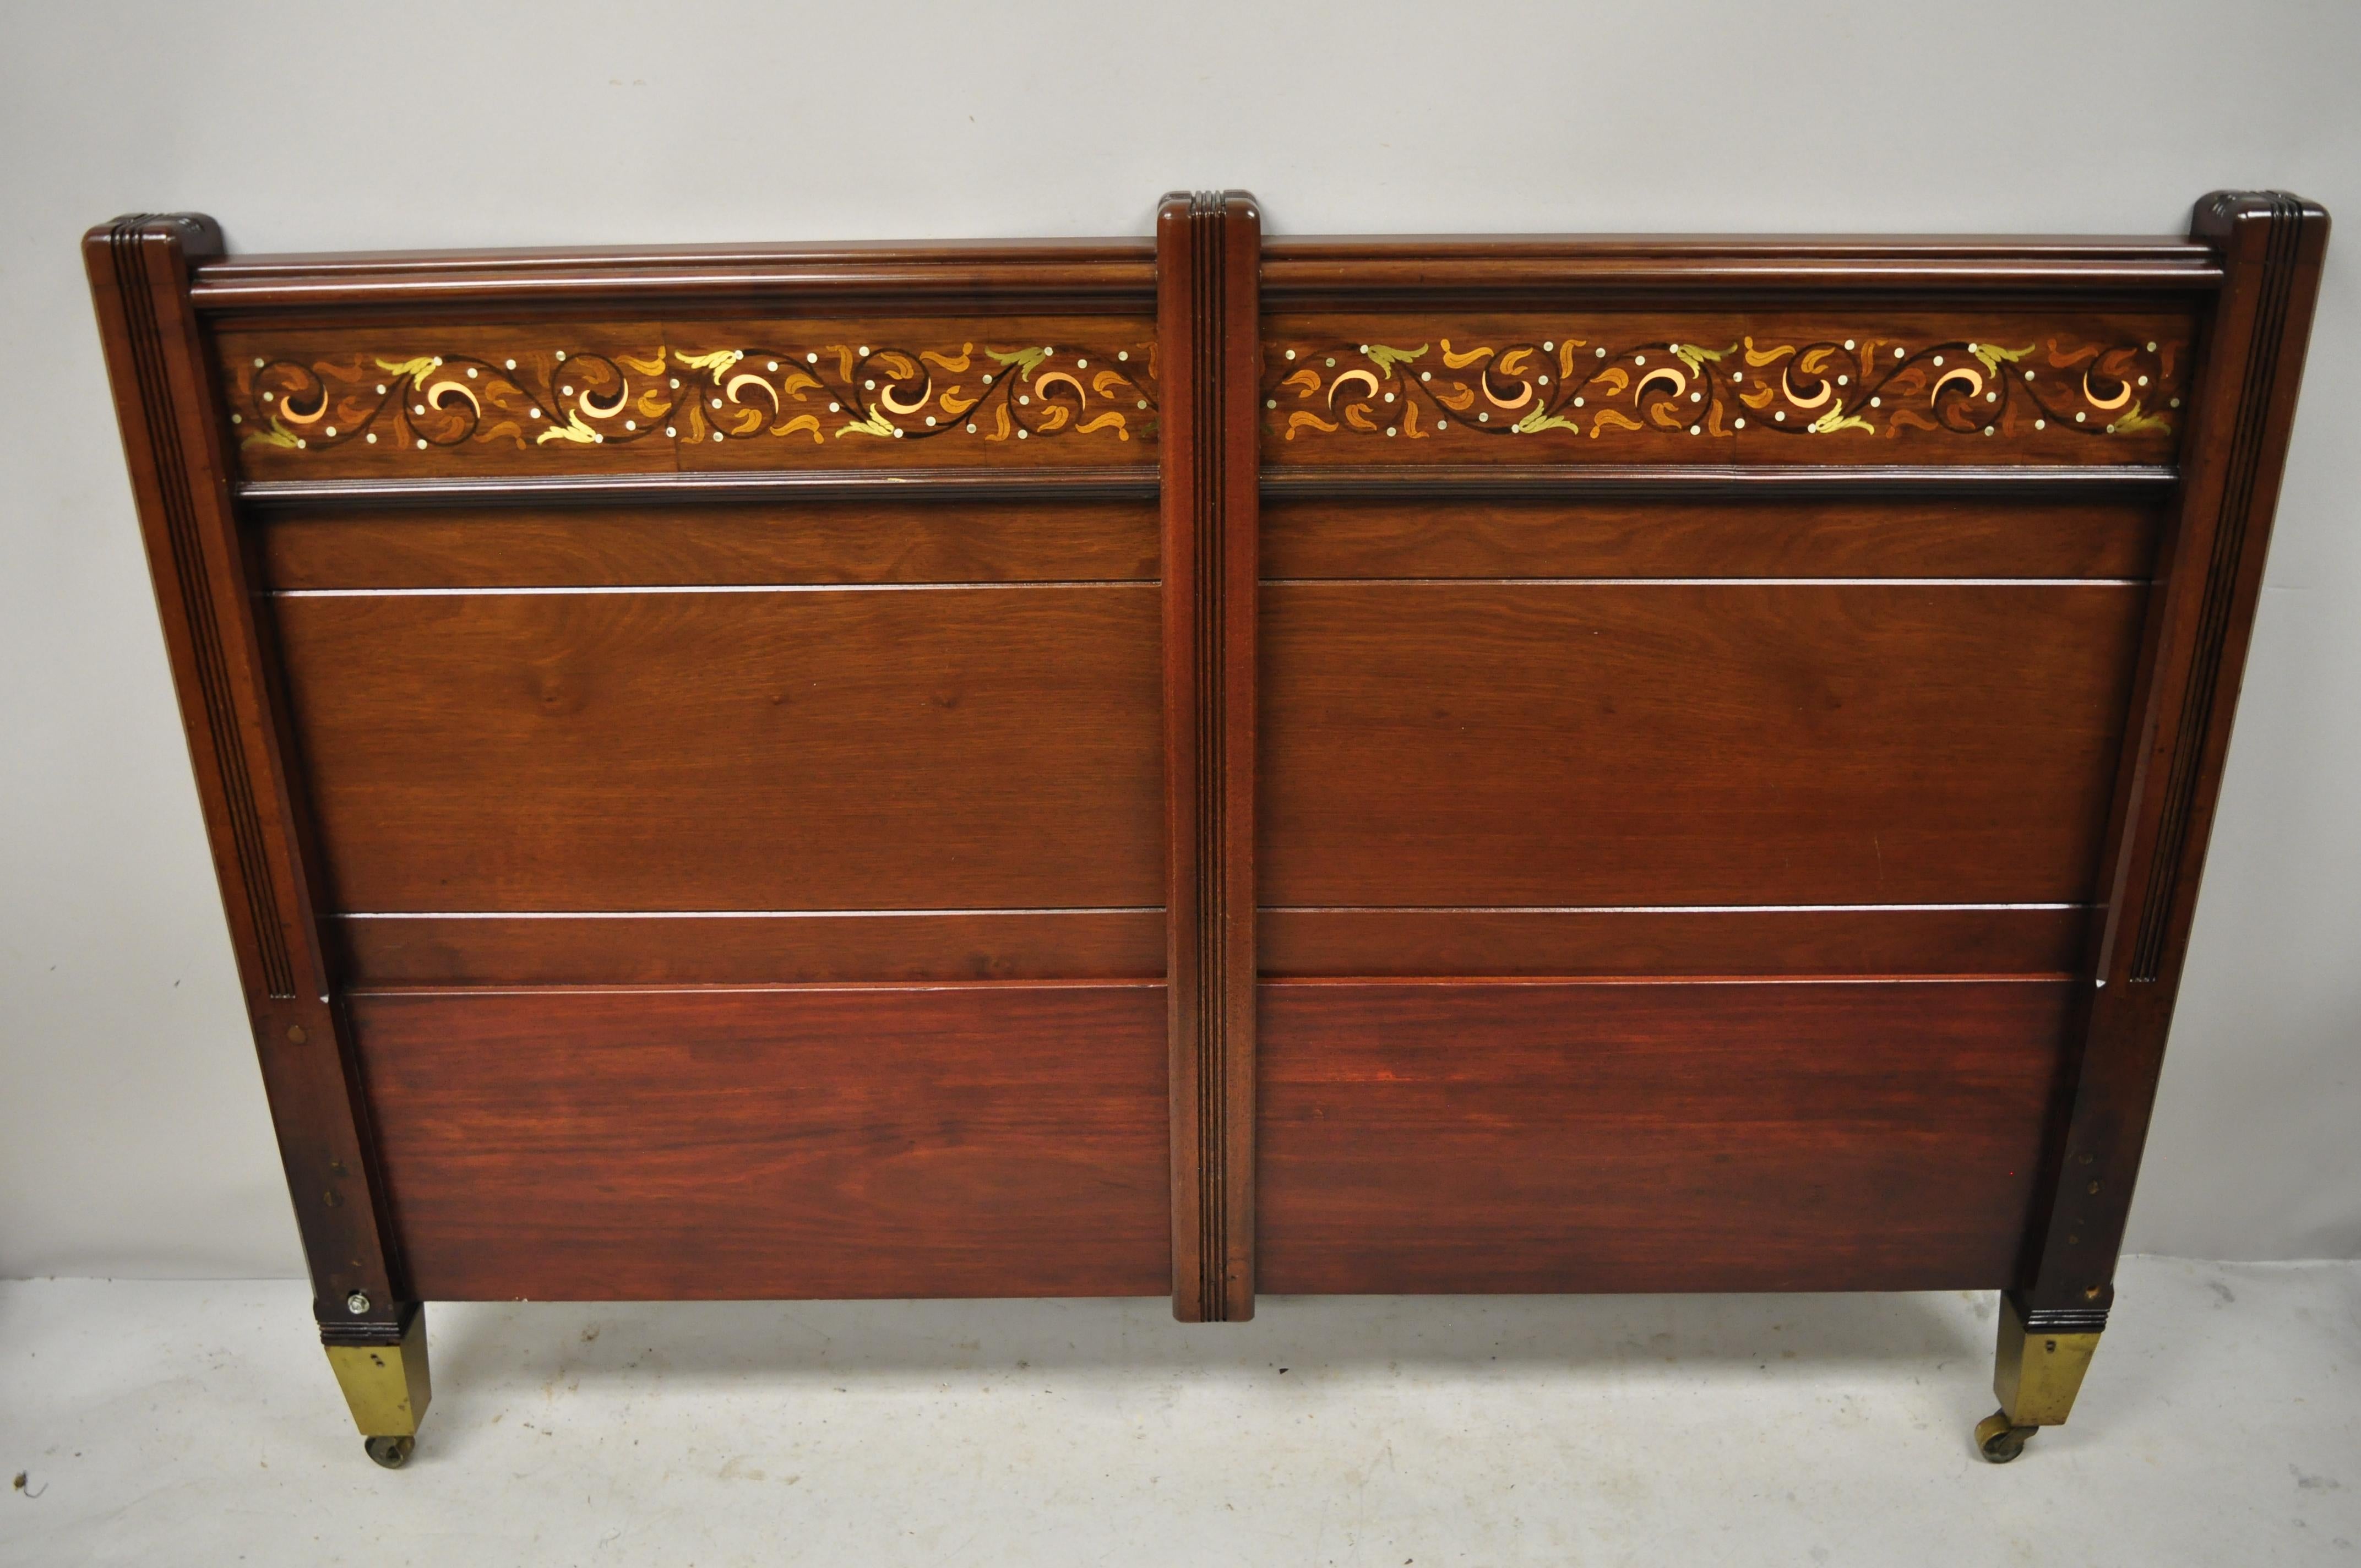 Herts Brothers Brass Satinwood Inlay Edwardian Mahogany Queen Bed Headboard For Sale 2